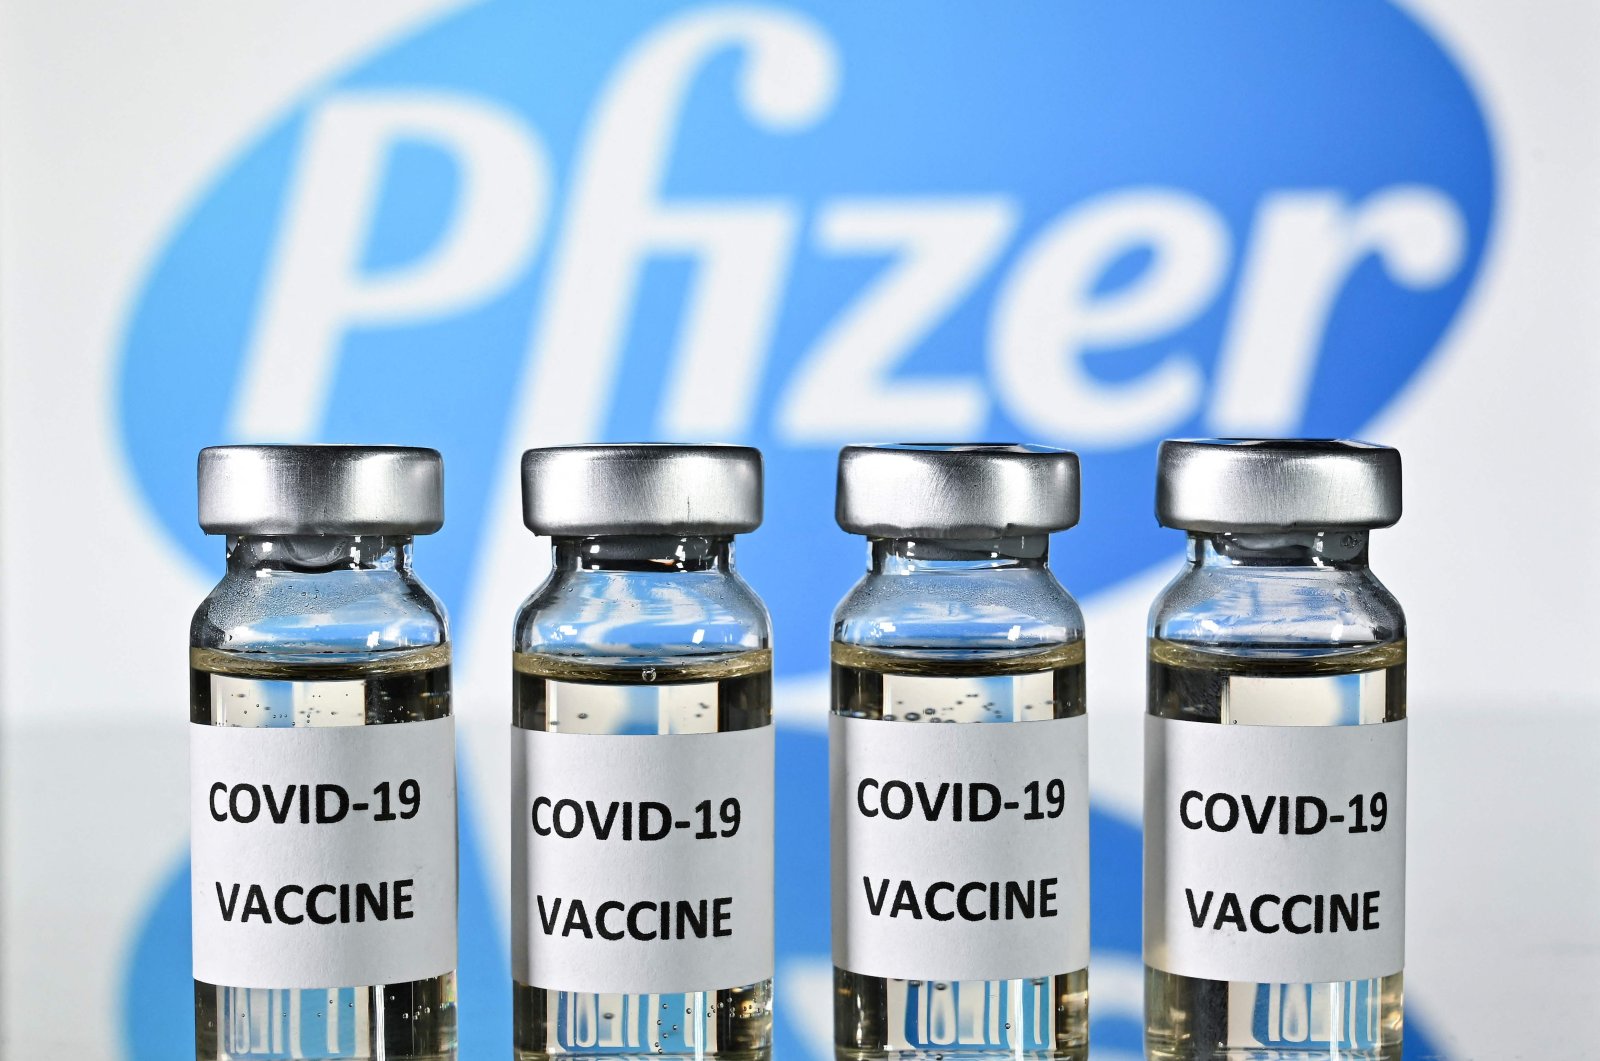 Vials with COVID-19 vaccine stickers attached, with the logo of the American pharmaceutical company Pfizer, on Nov. 17, 2020. (AFP Photo)